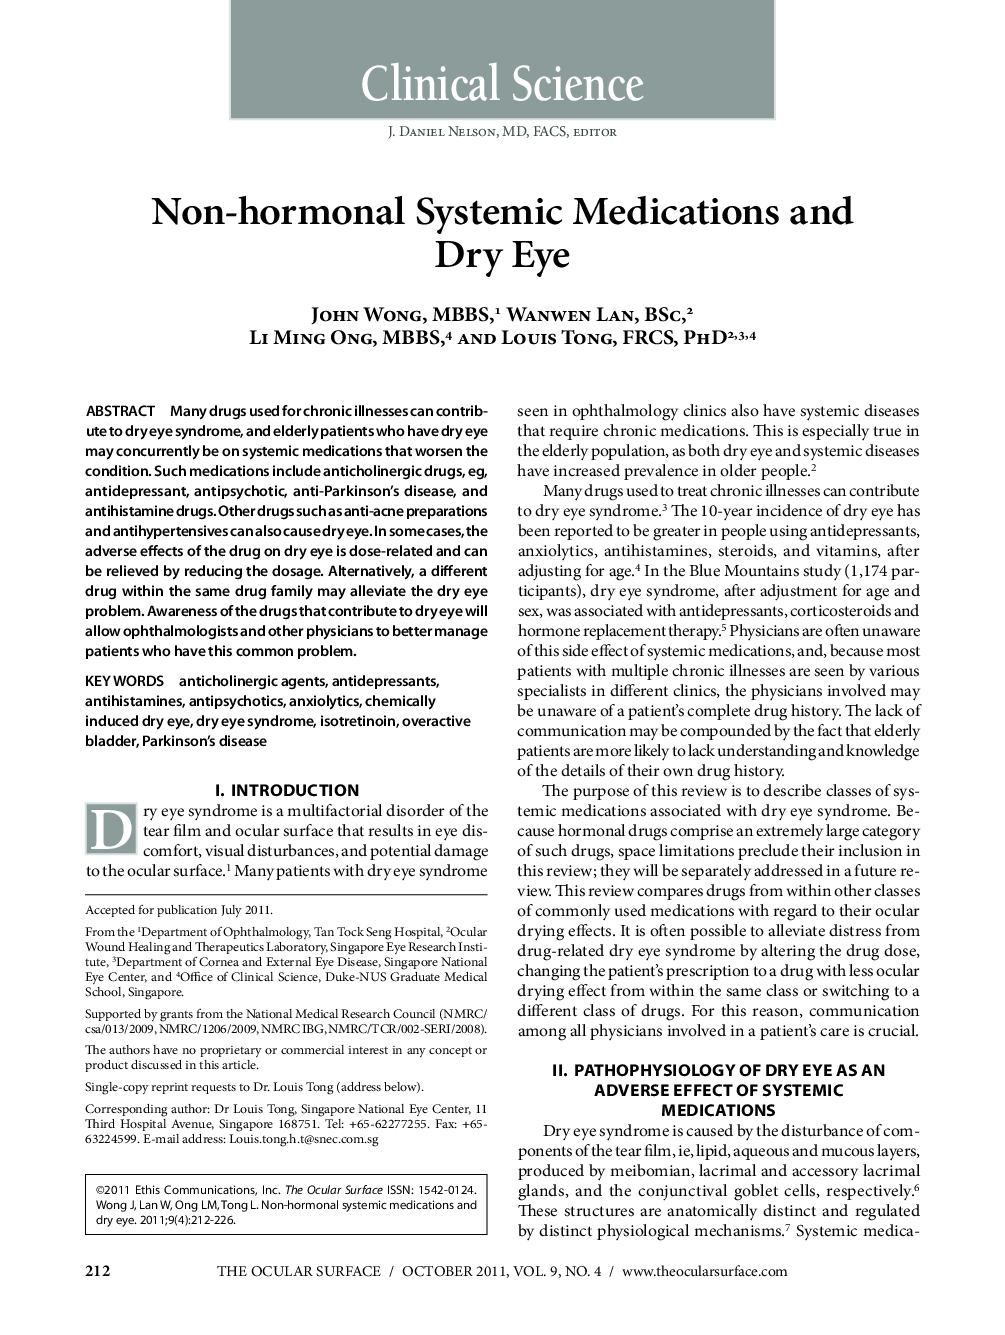 Non-hormonal Systemic Medications and Dry Eye 